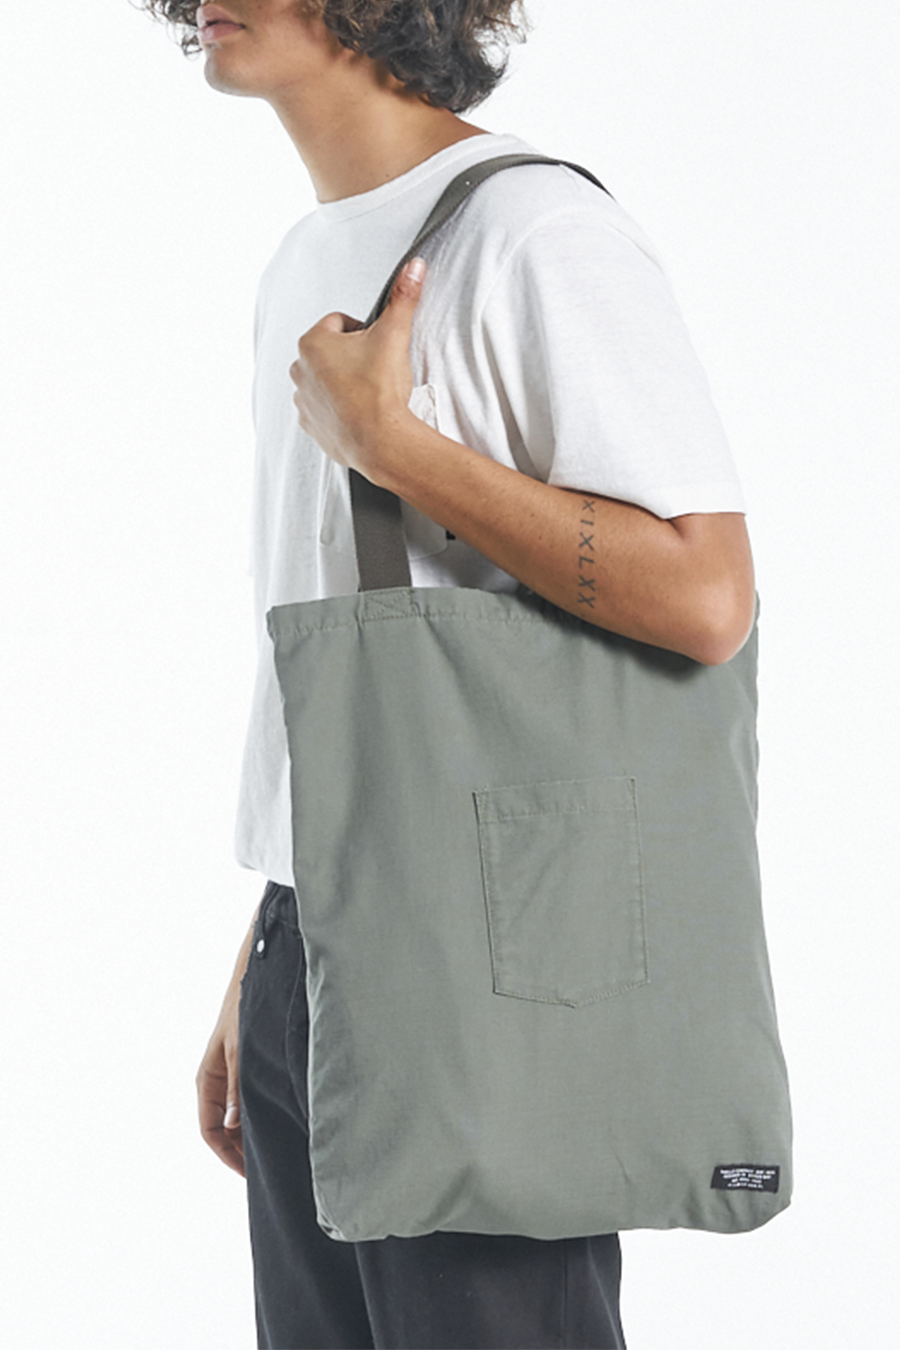 Brigade Tote | Army Green - Main Image Number 1 of 1